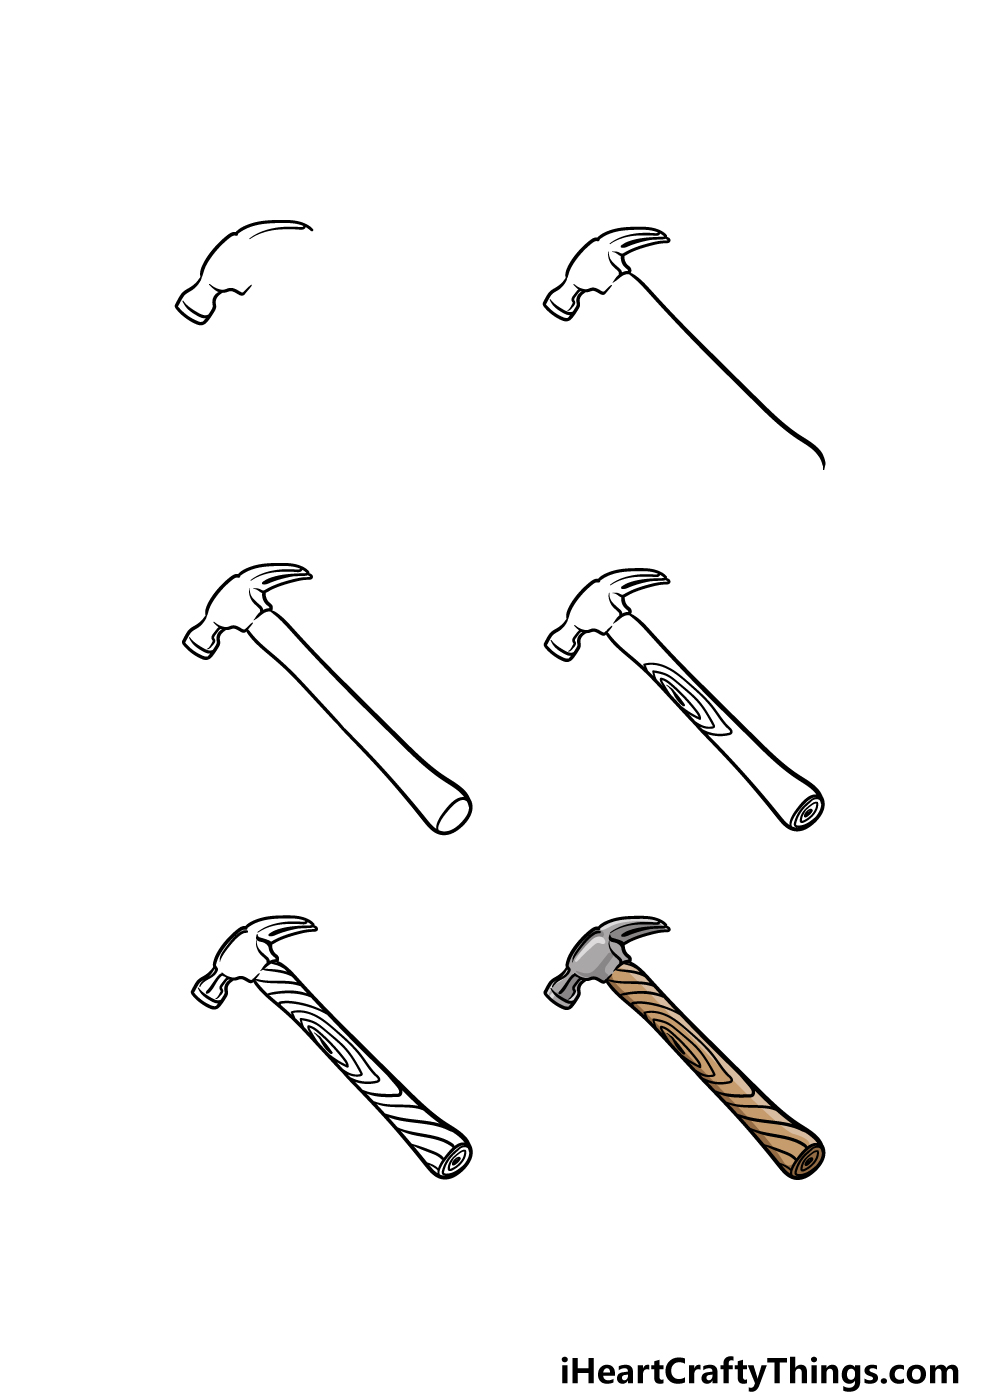 how to draw a hammer in 6 steps